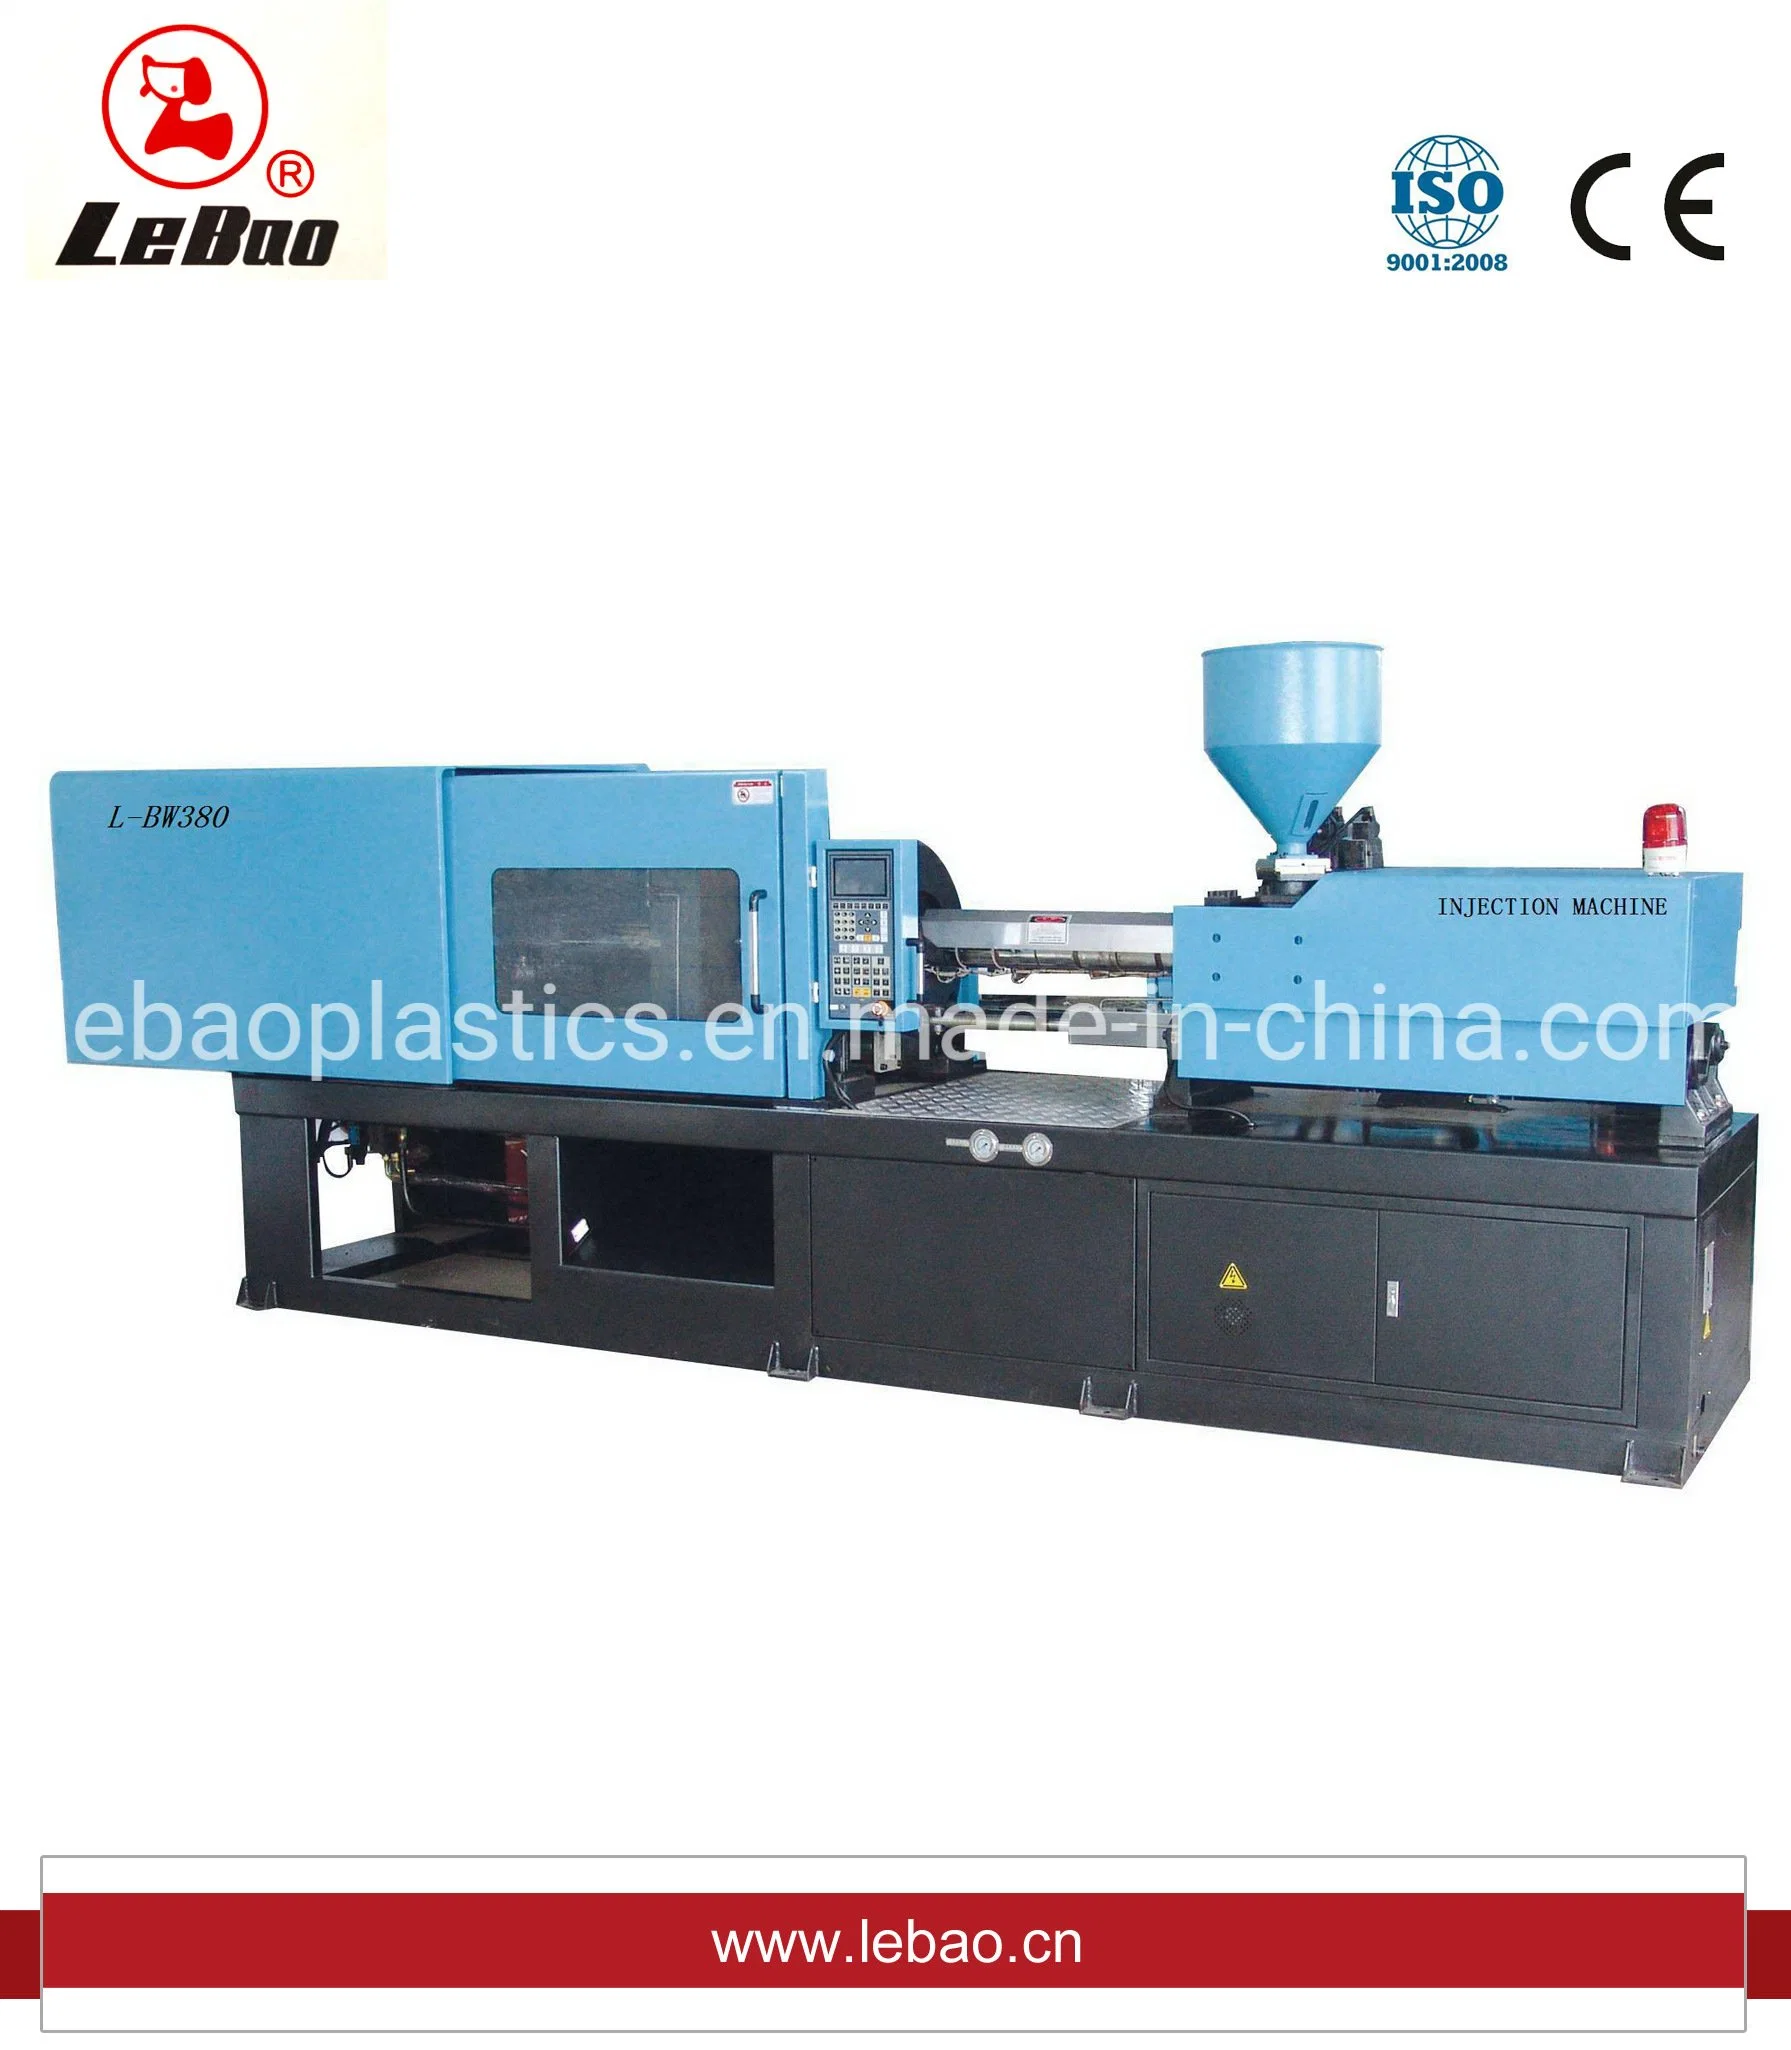 Plastic Injection Moulding Machine for Plastic Products